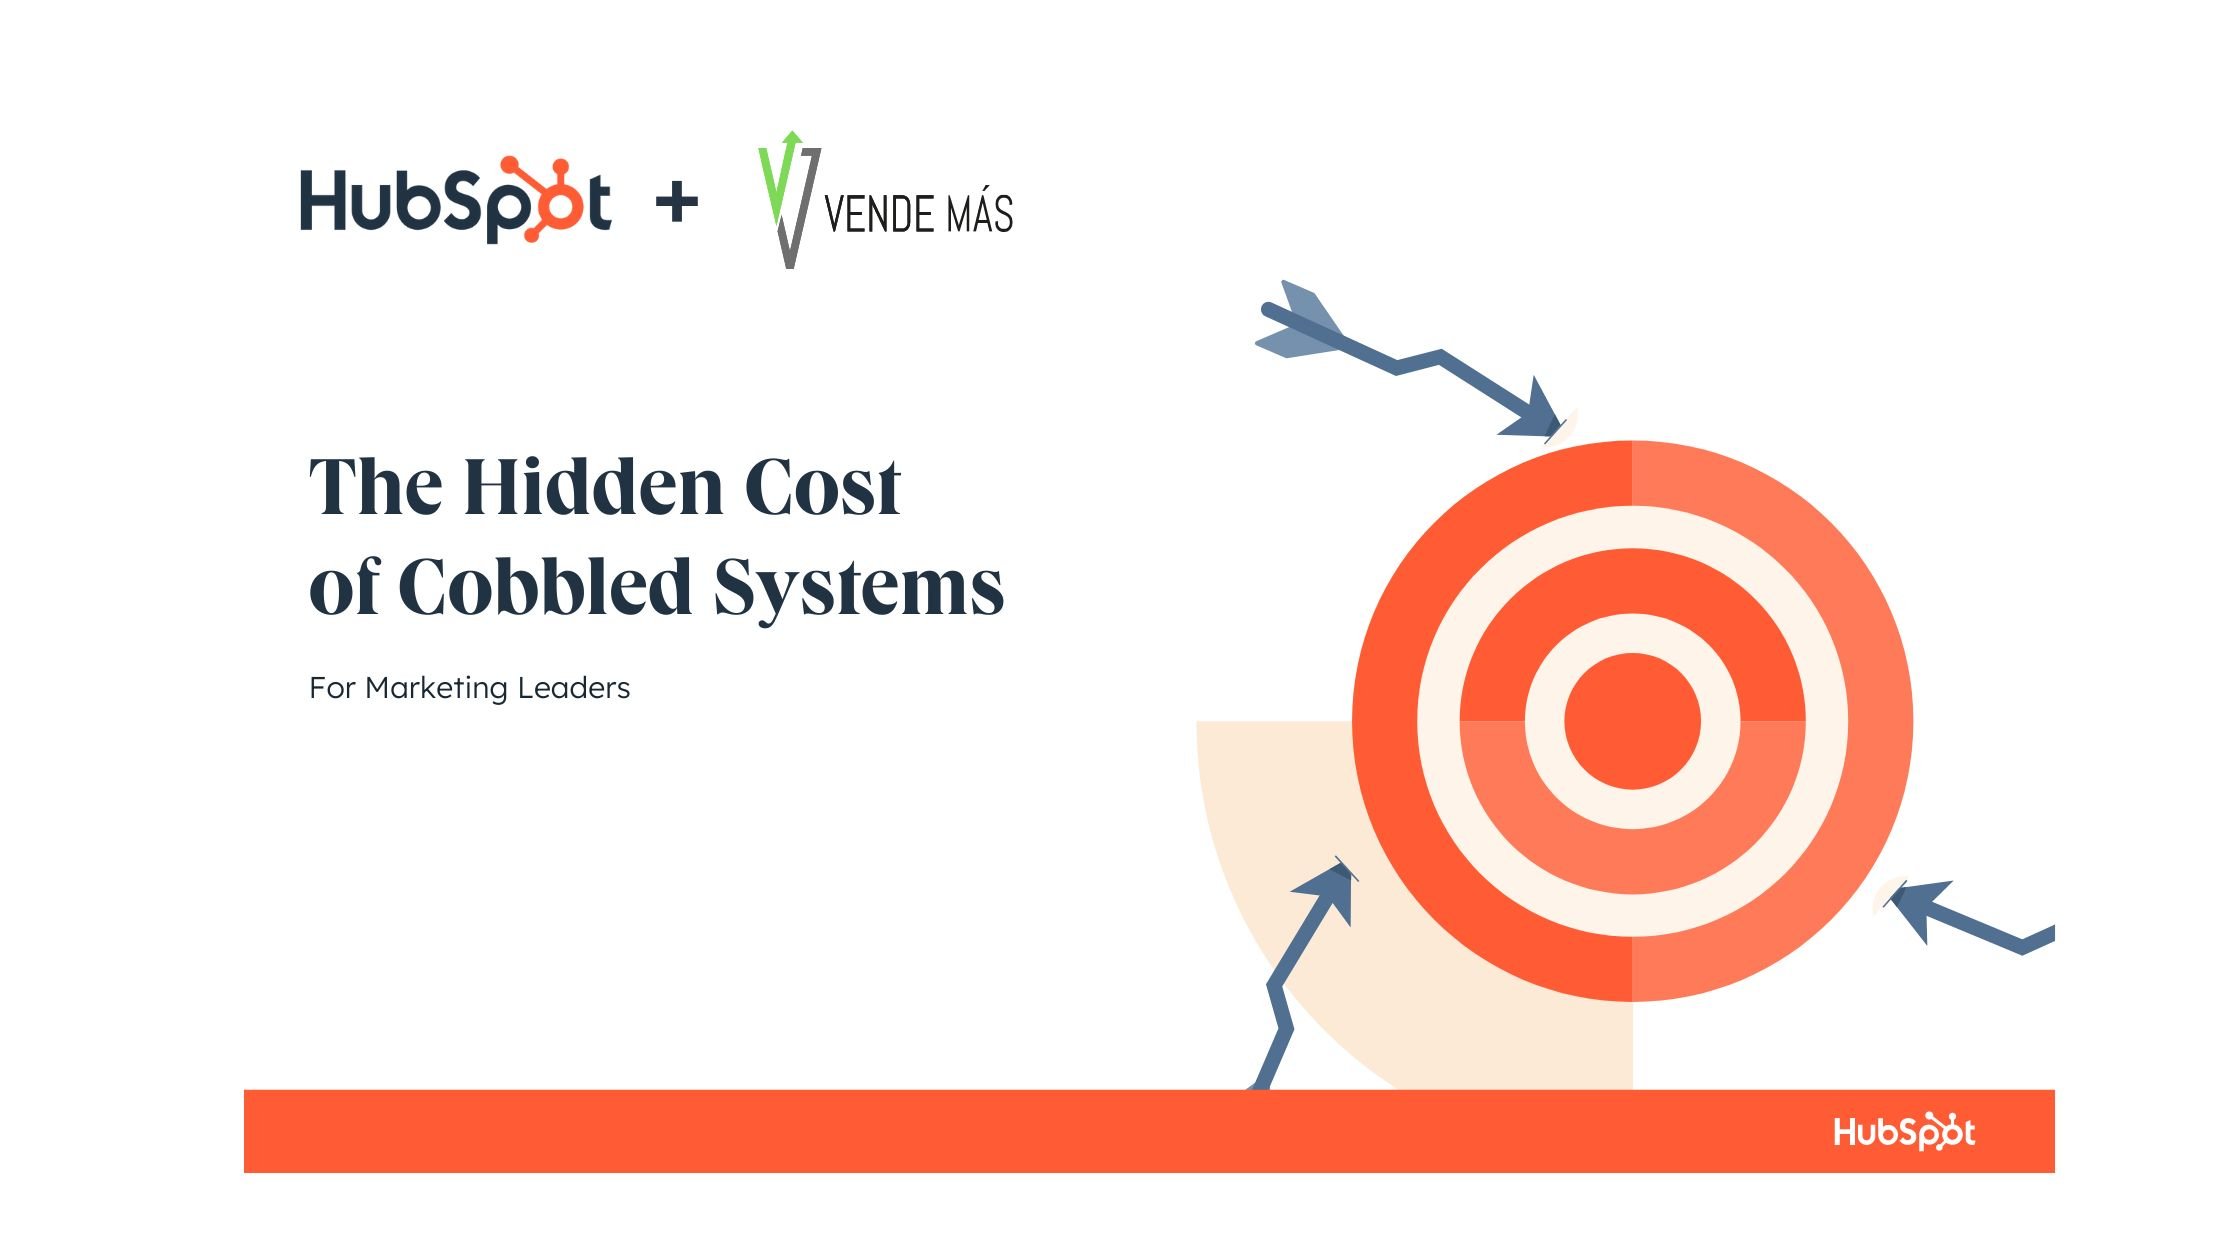 The Hidden Cost of Cobbled Systems